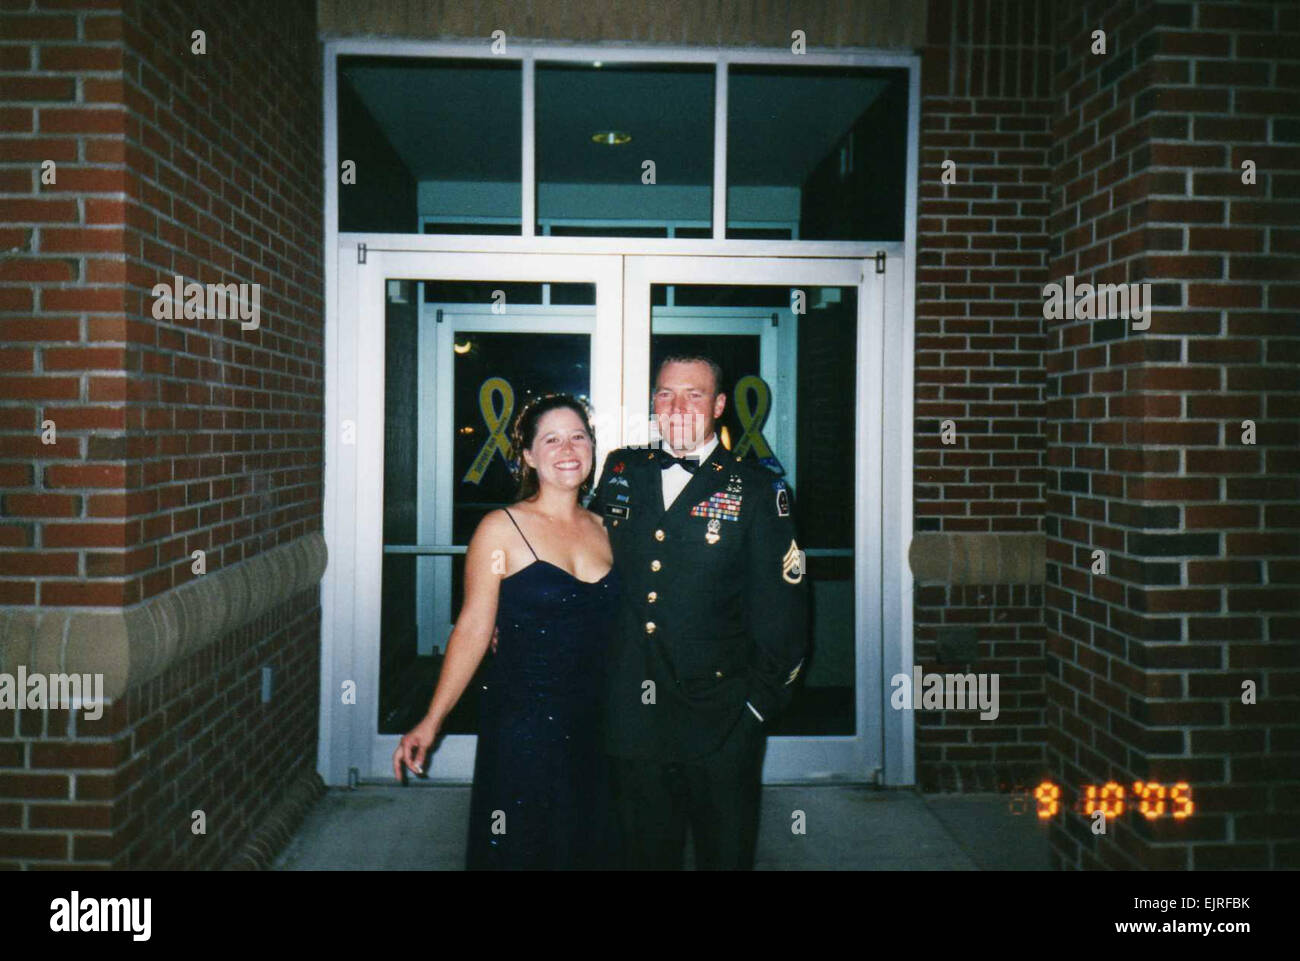 A personal photo of Sergeant 1st Class Jared C. Monti, the first Soldier recipient for actions in Afghanistan/Operation Enduring Freedom.  To learn more, visit: /medalofhonor/monti  /medalofhonor/monti Stock Photo